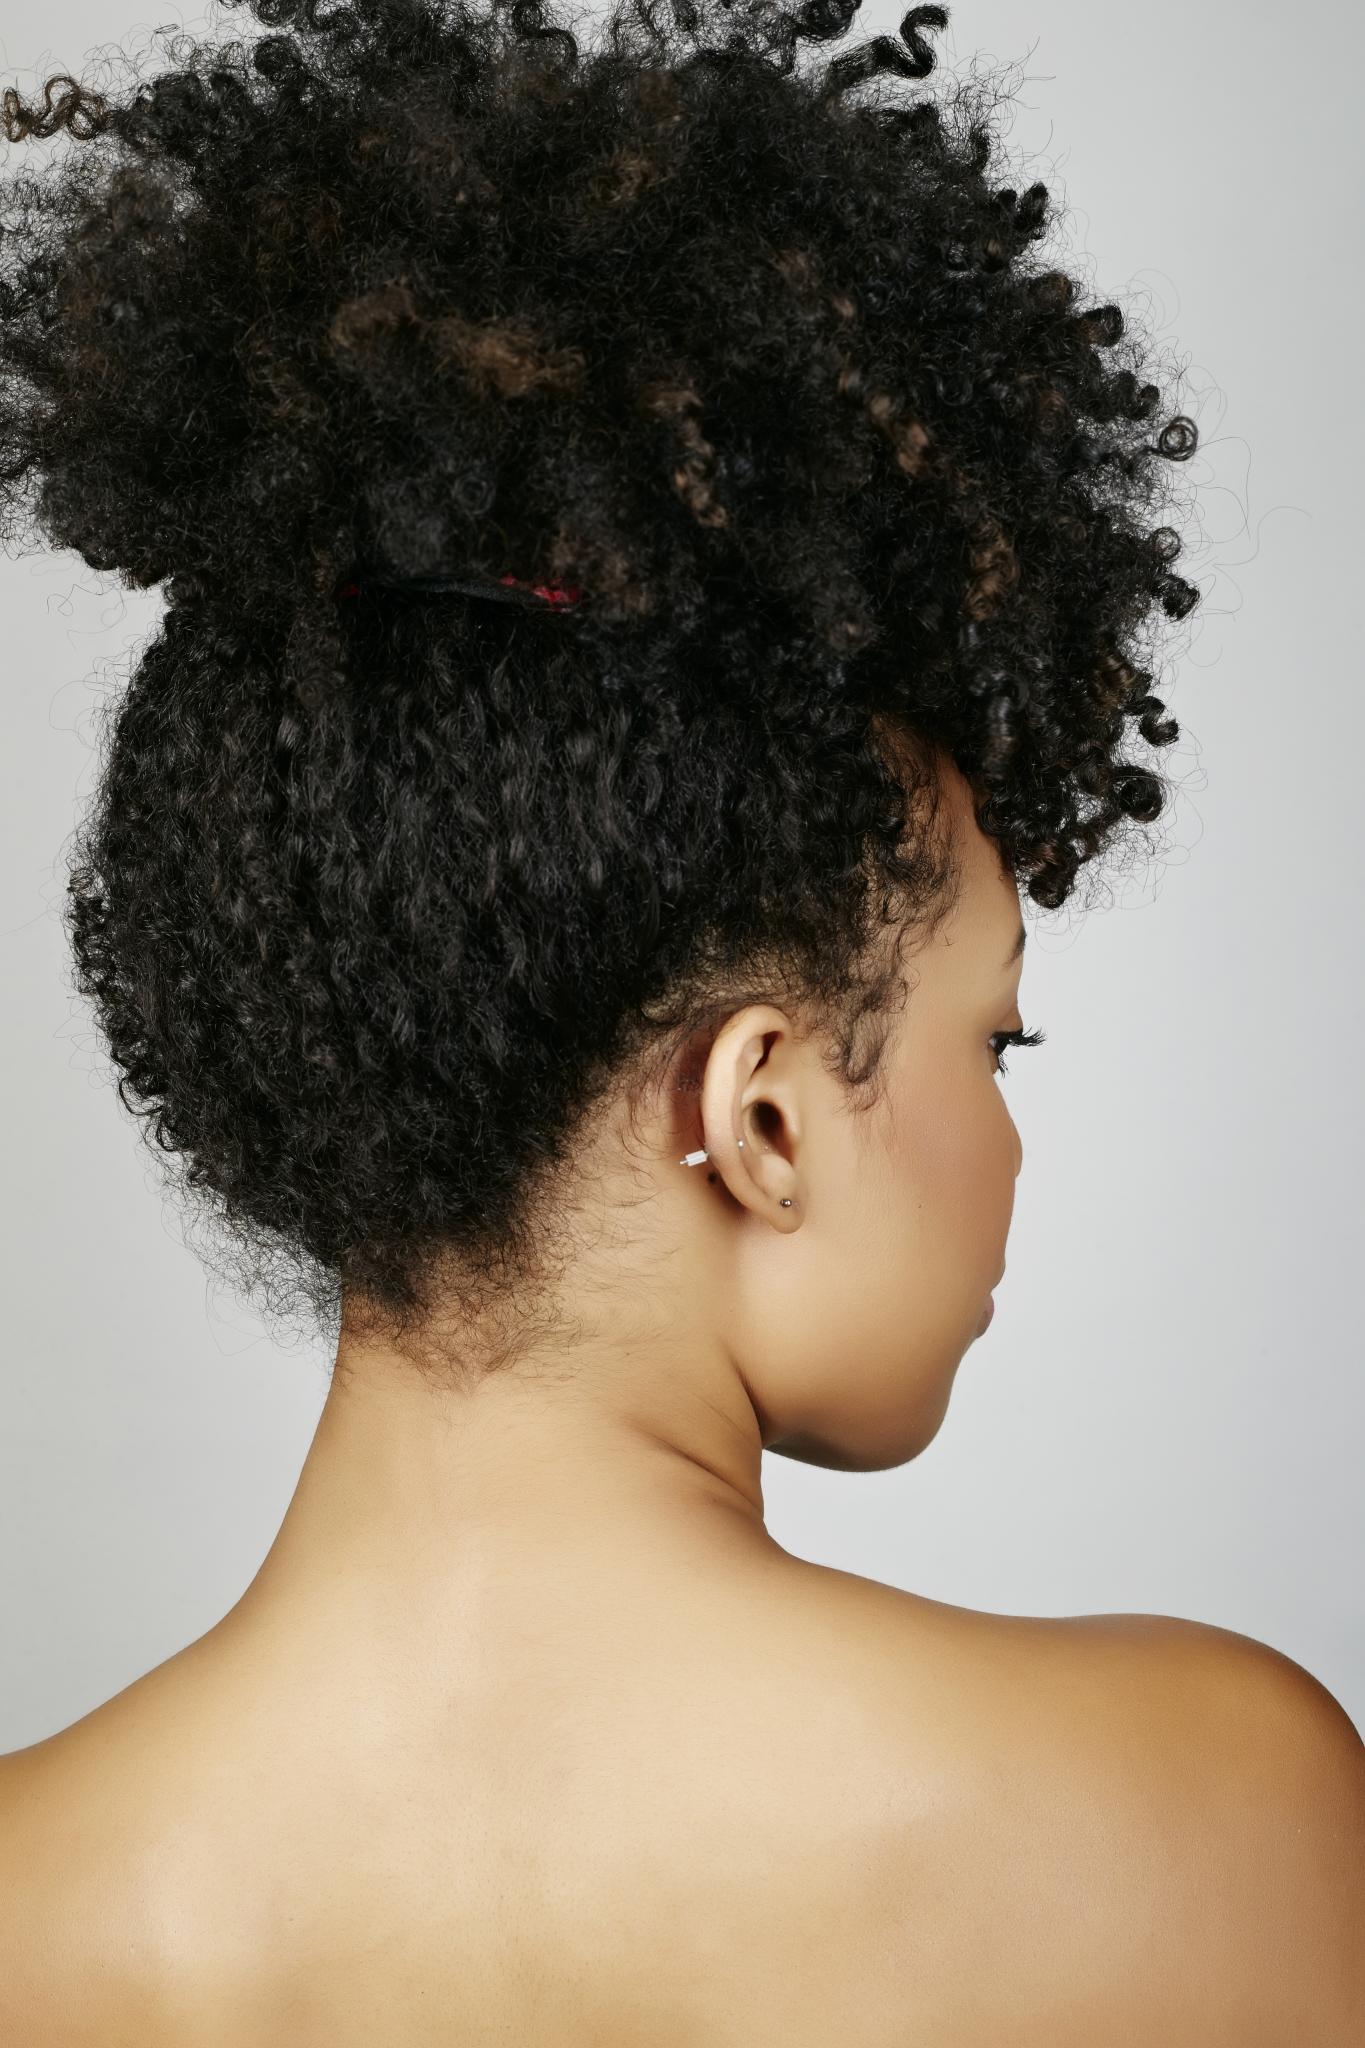 Is It Ever Ok To Use Sulfates On Your Curls?